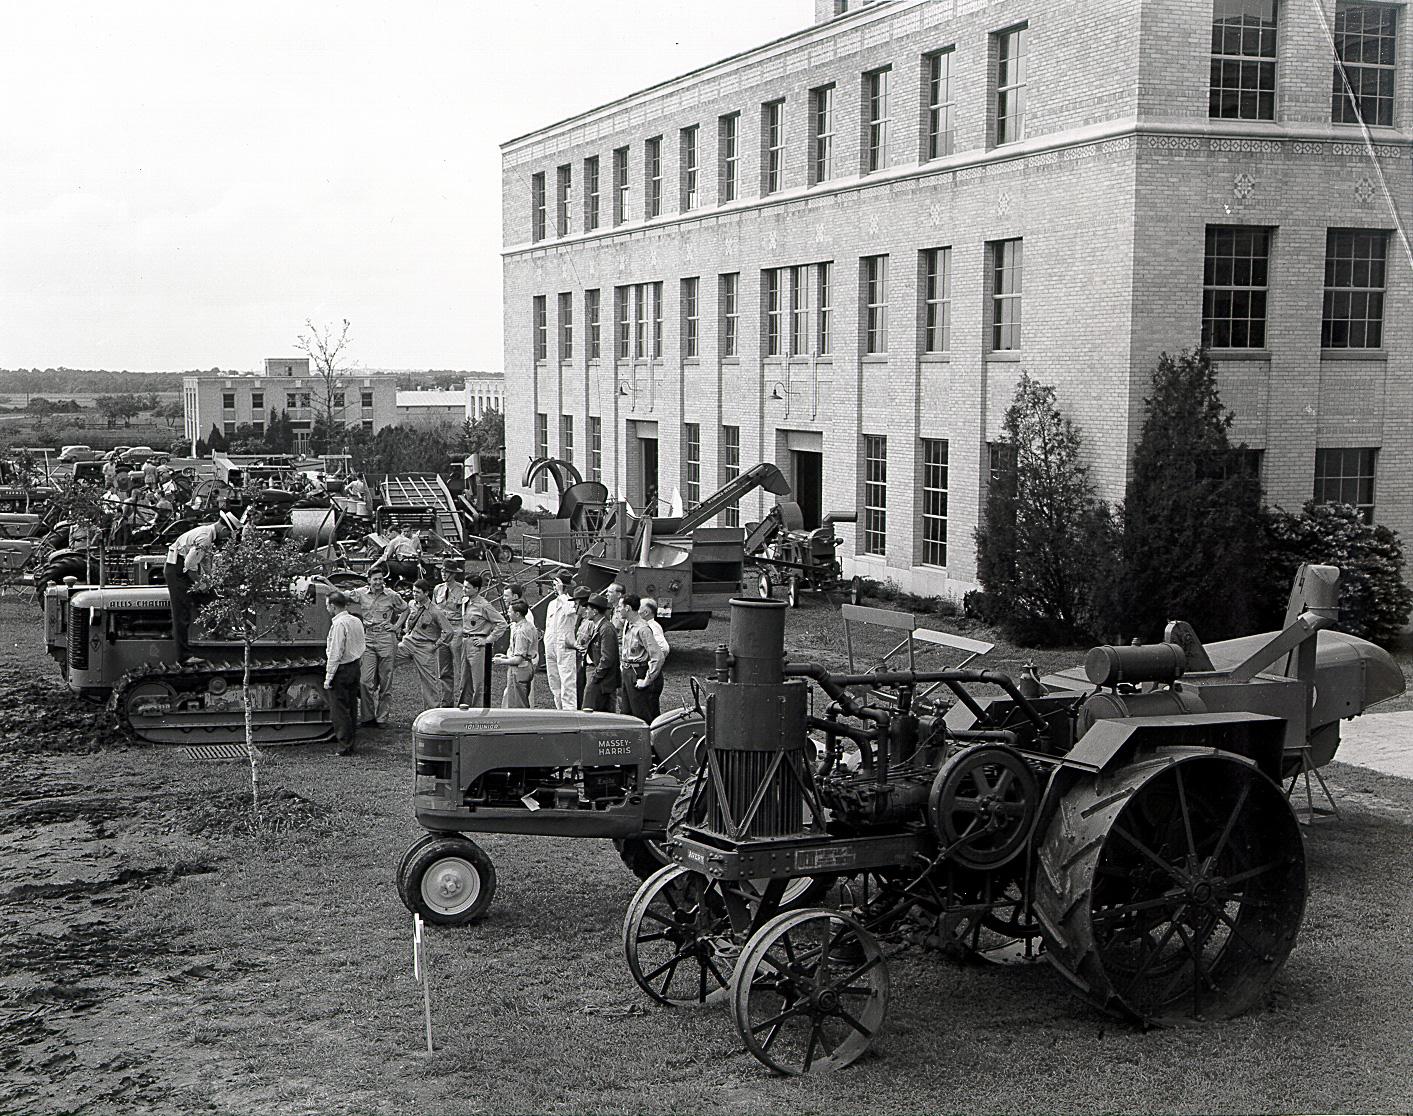 In the early years, the department would host an Agricultural Engineering Fair to demonstrate the newest technologies.